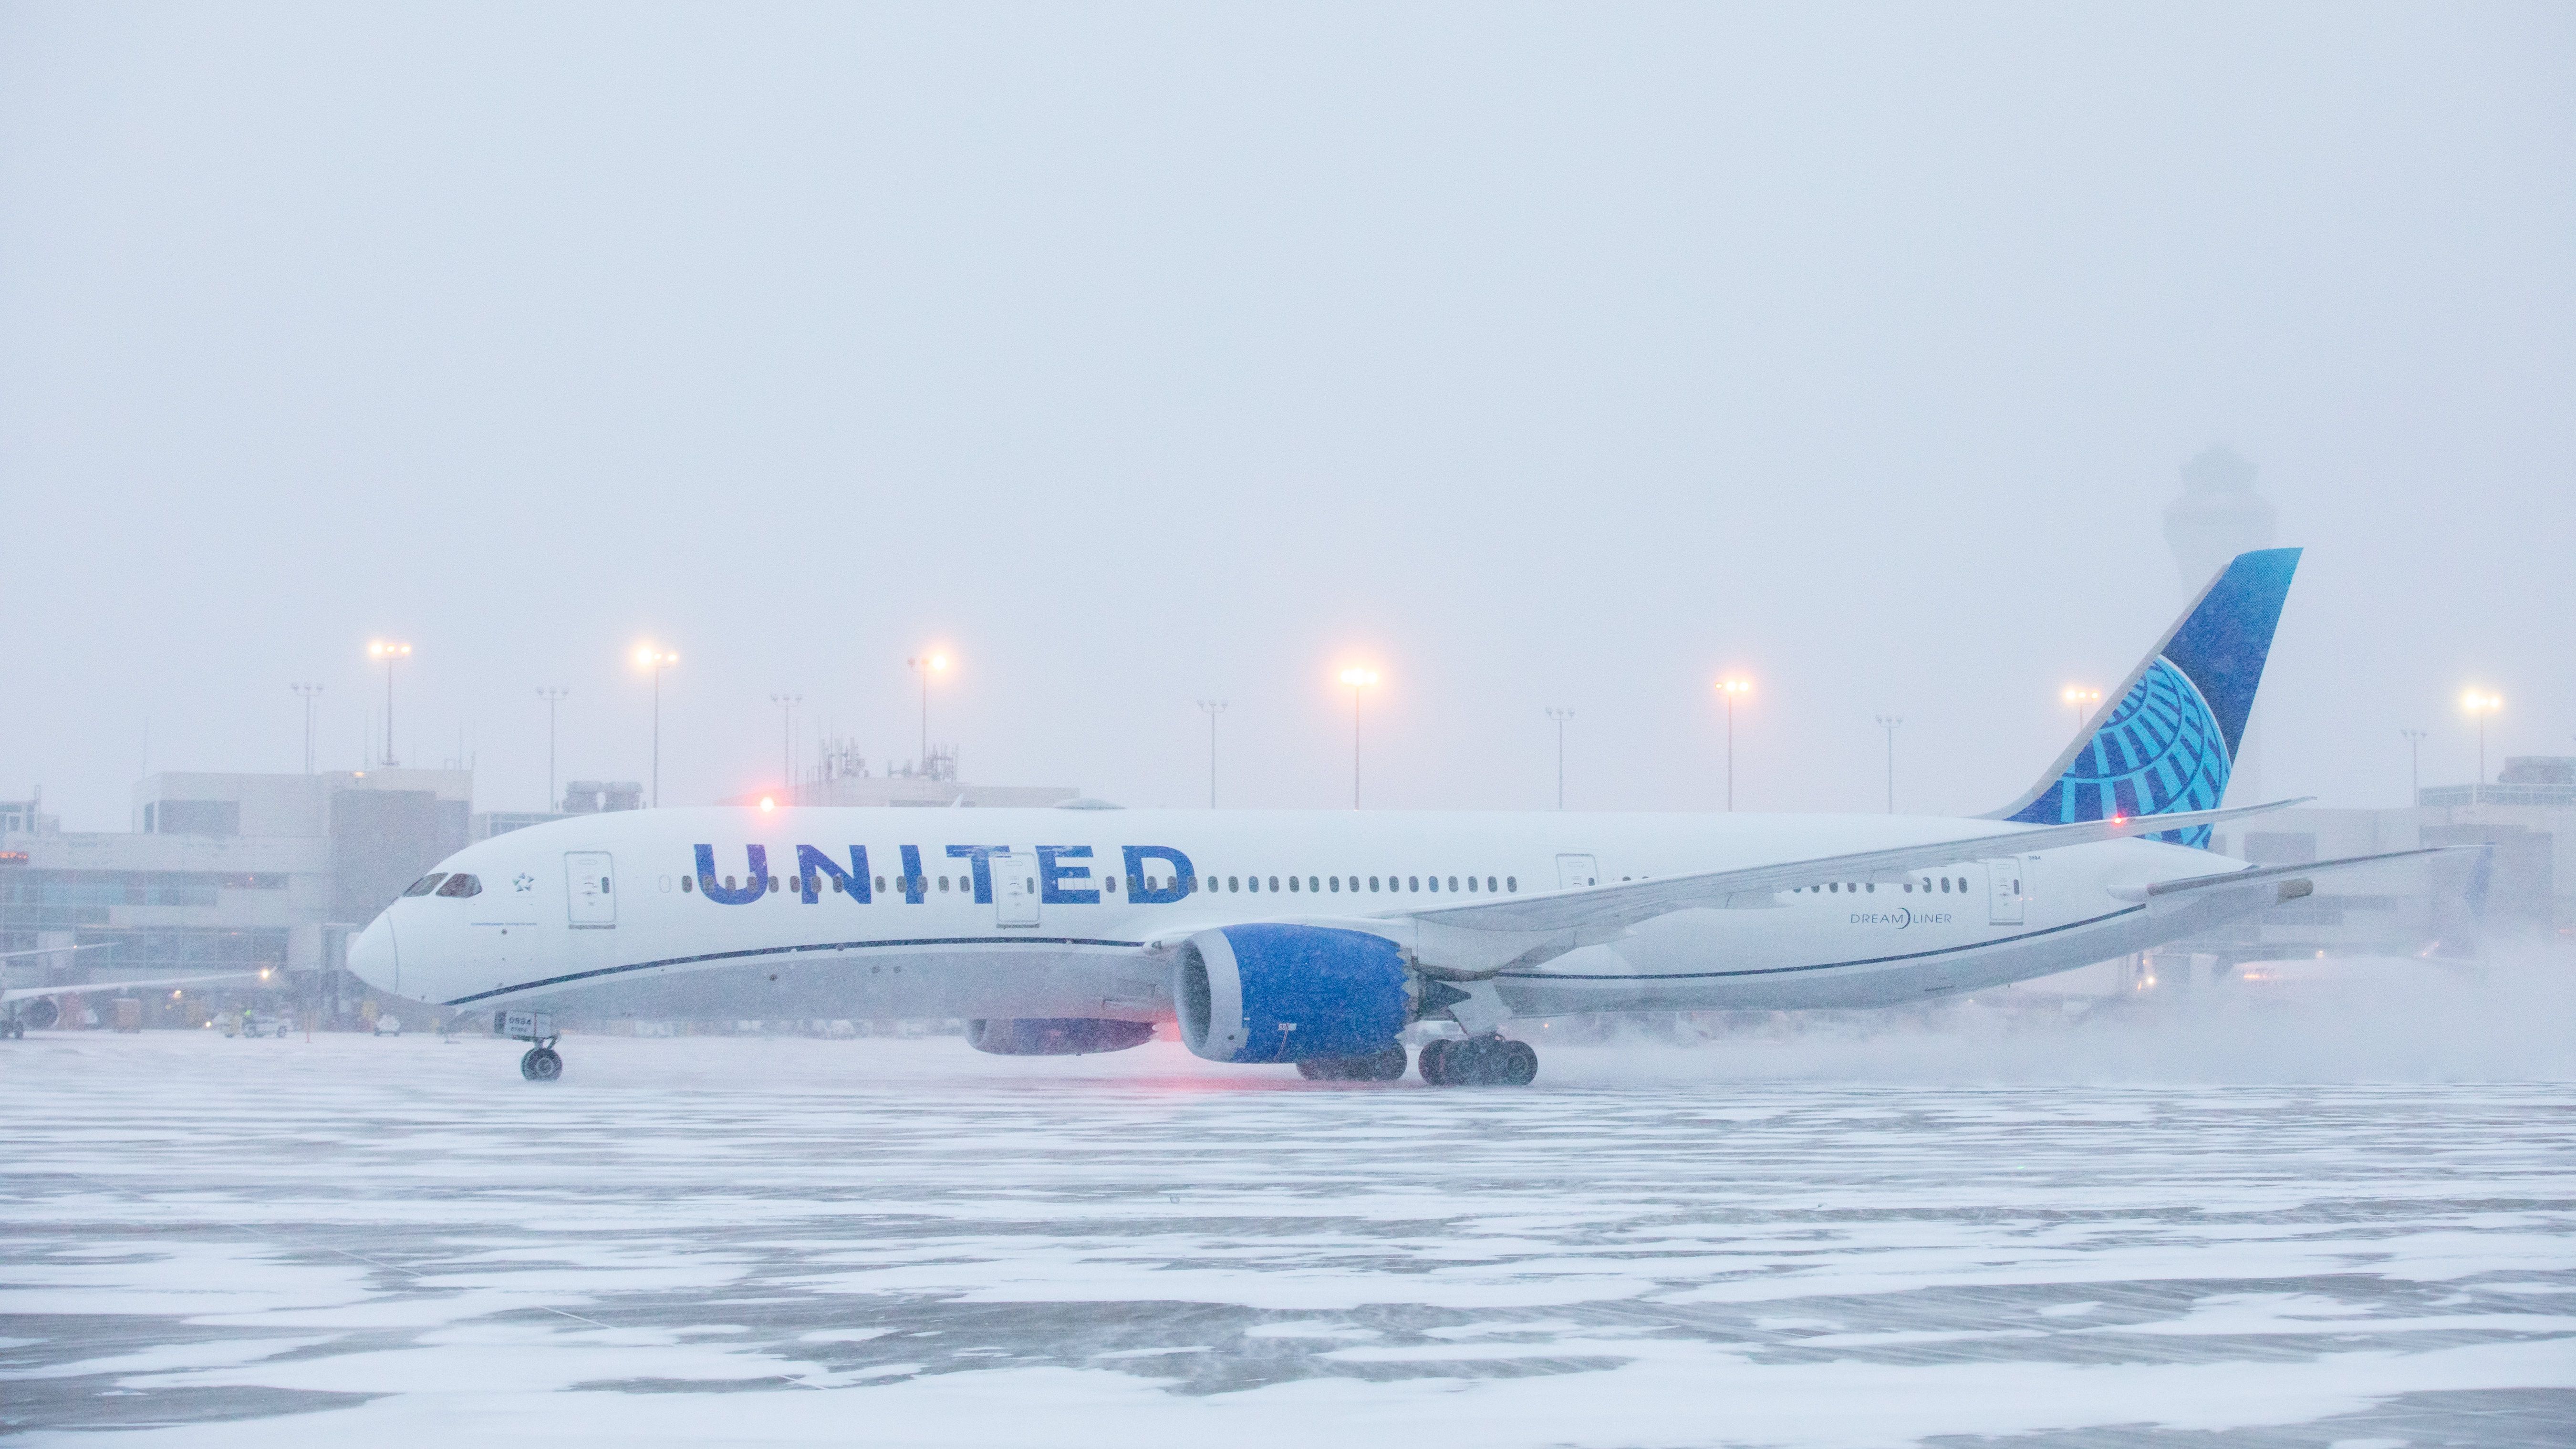 United Airlines at Denver in the snow